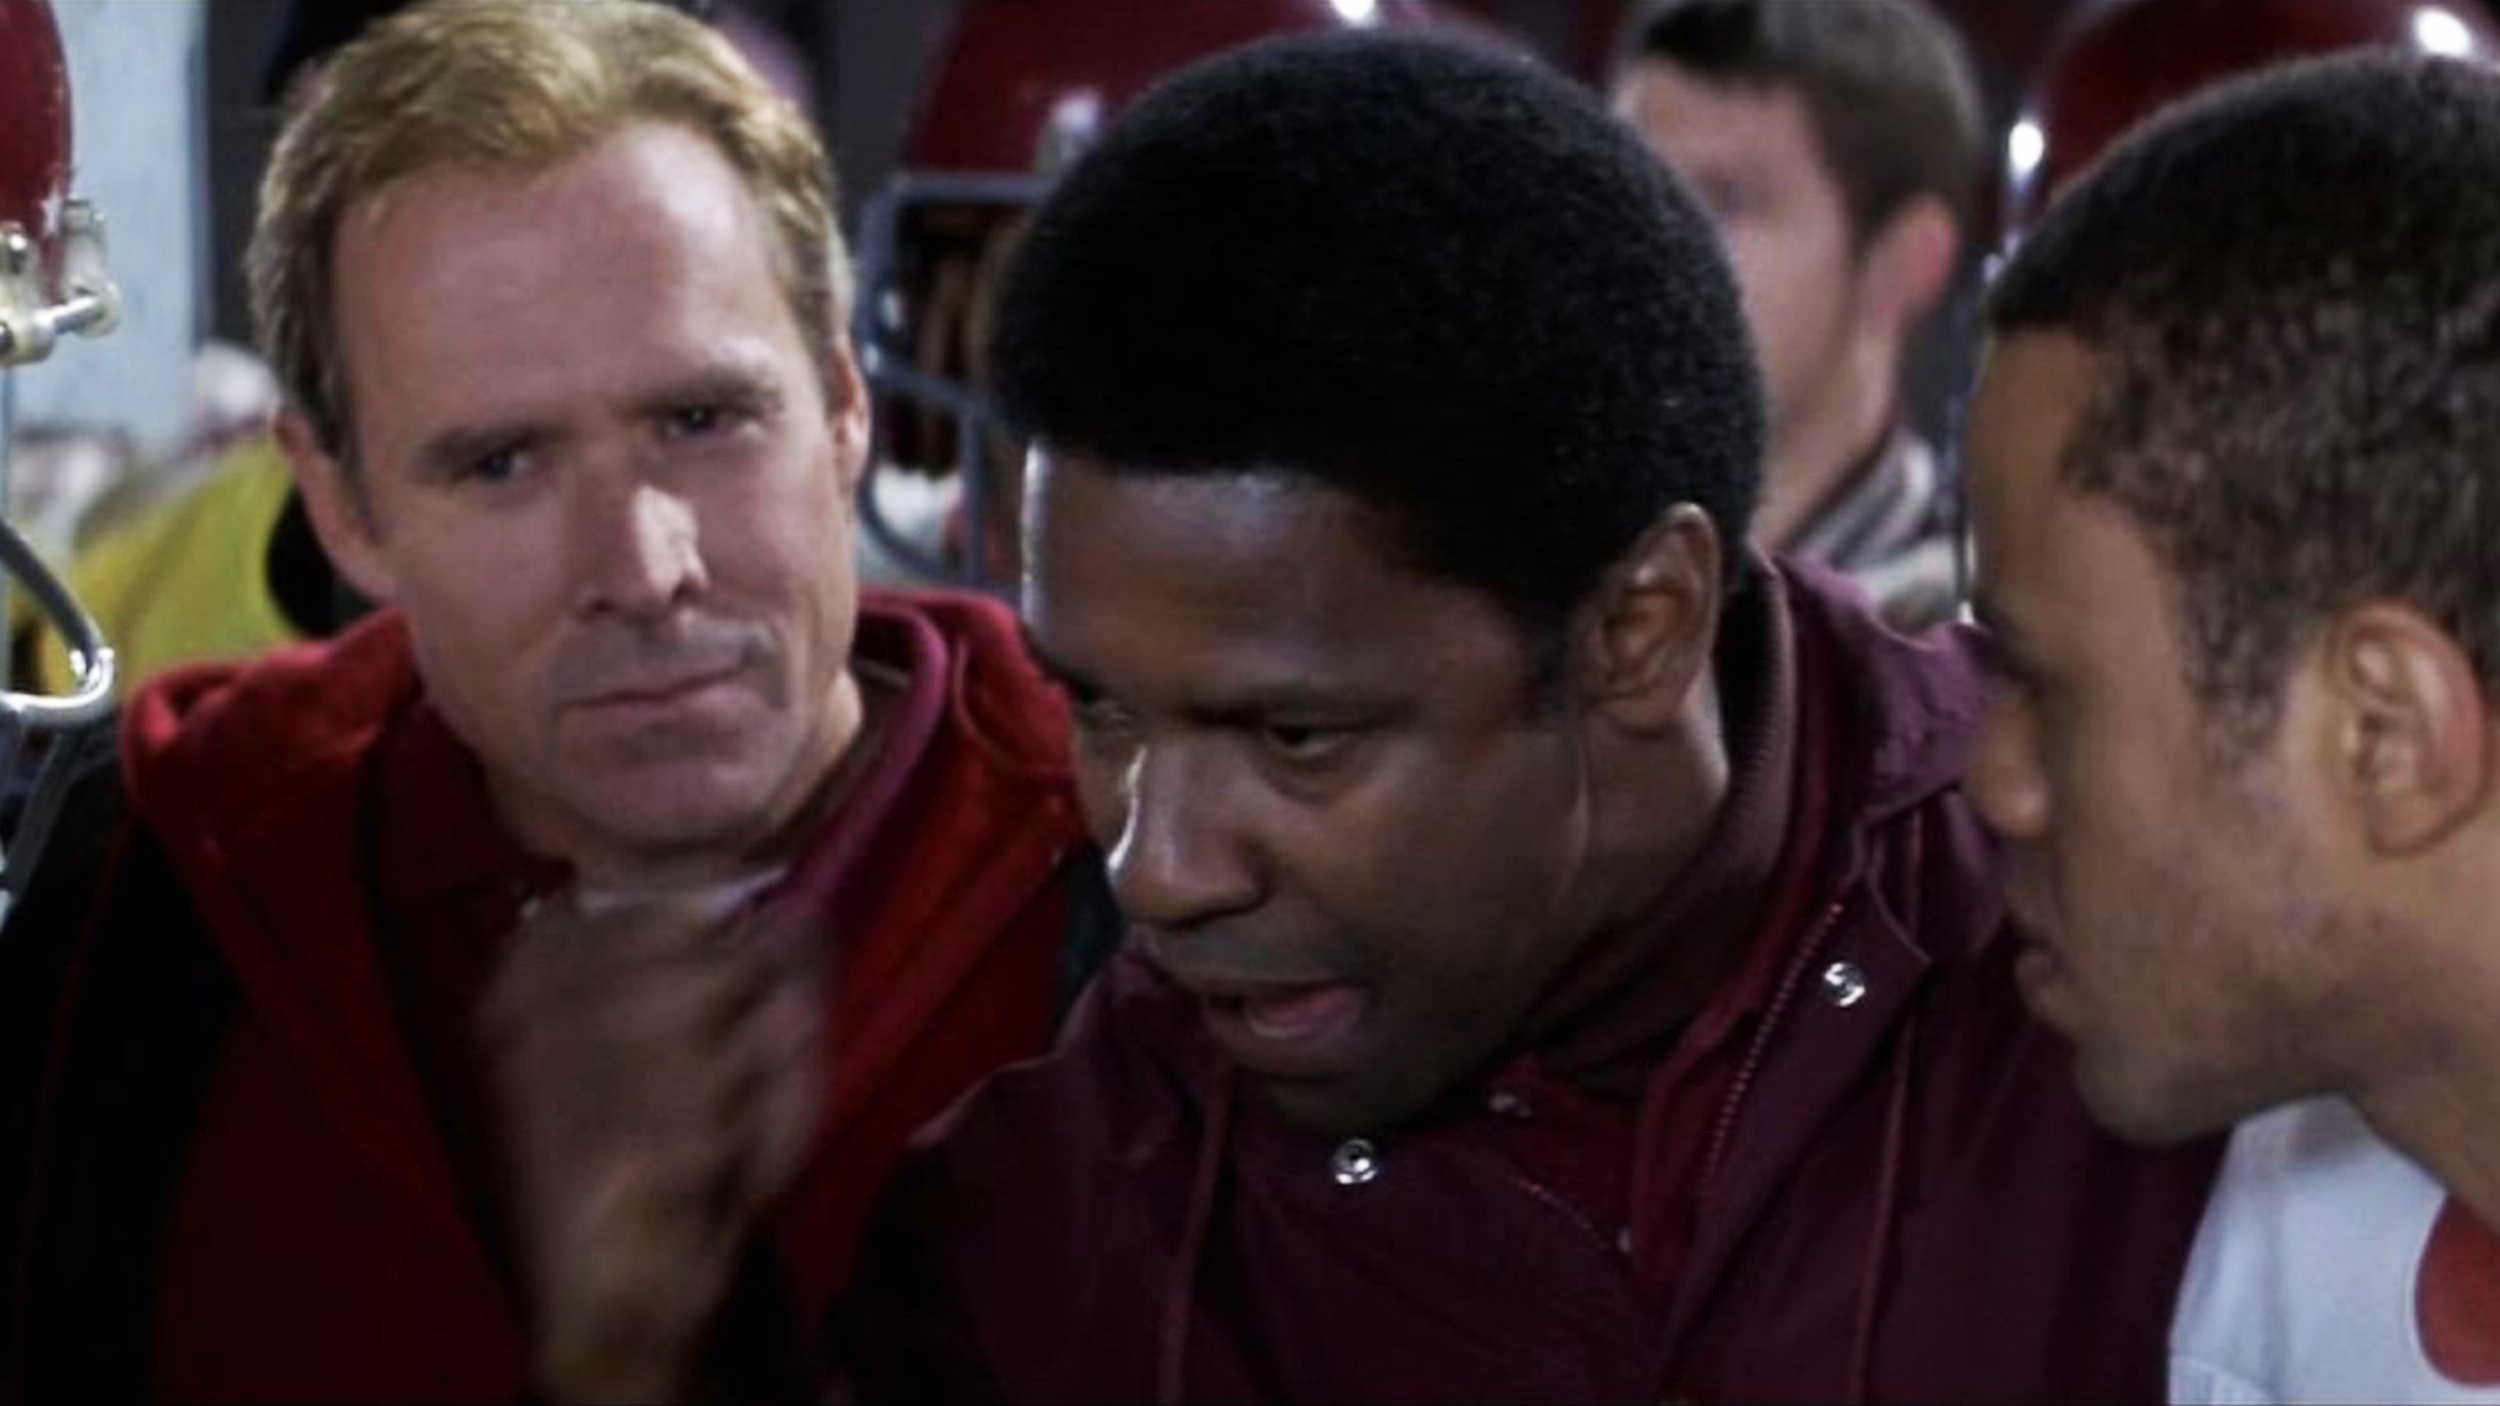 <p>Hey, when you have Denzel Washington at your disposal, your movie has something going for it. He got people to see something called “Roman J. Israel!” Here, he plays the black head coach of a football team as he attempts to integrate his squad in the 1970s. There are tensions, but since this is a sports movie you probably know how it goes.</p><p>You may also like: <a href='https://www.yardbarker.com/nhl/articles/every_nhl_player_to_score_60_or_more_goals_in_a_season/s1__40159449'>Every NHL player to score 60 or more goals in a season</a></p>